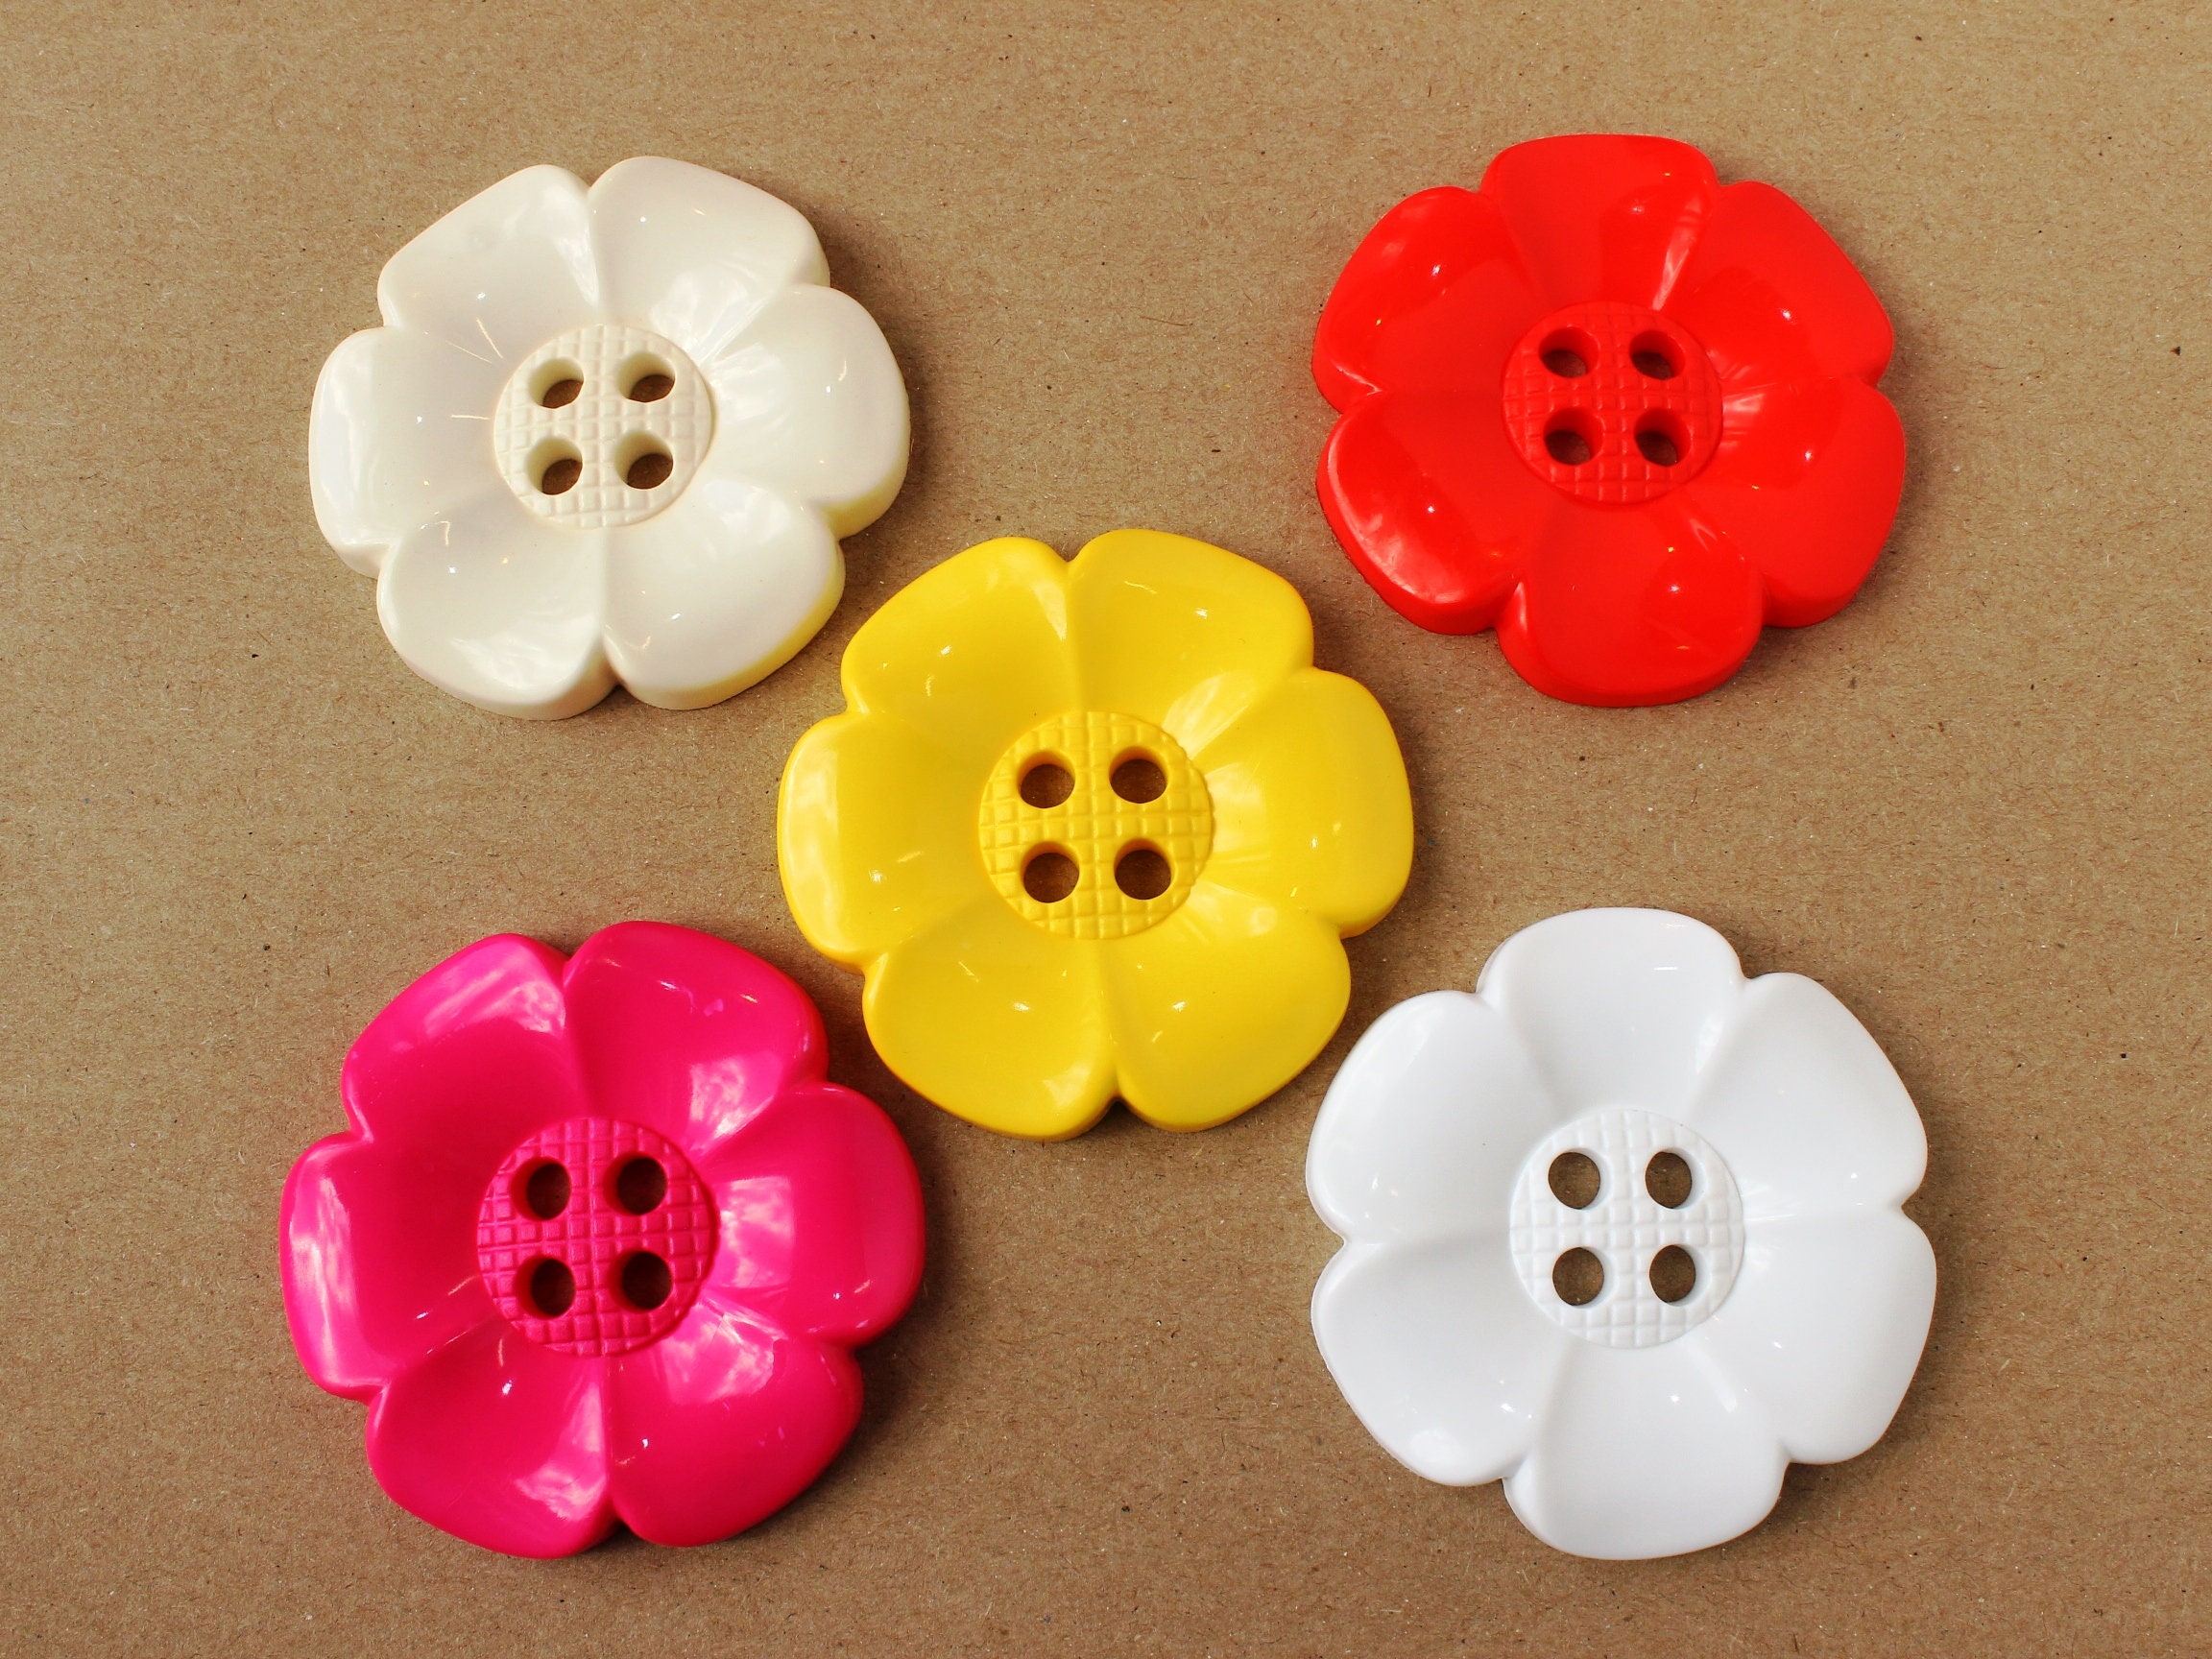 Giant WHITE Buttons, Giant Plastic Buttons 5cm, Extra Large